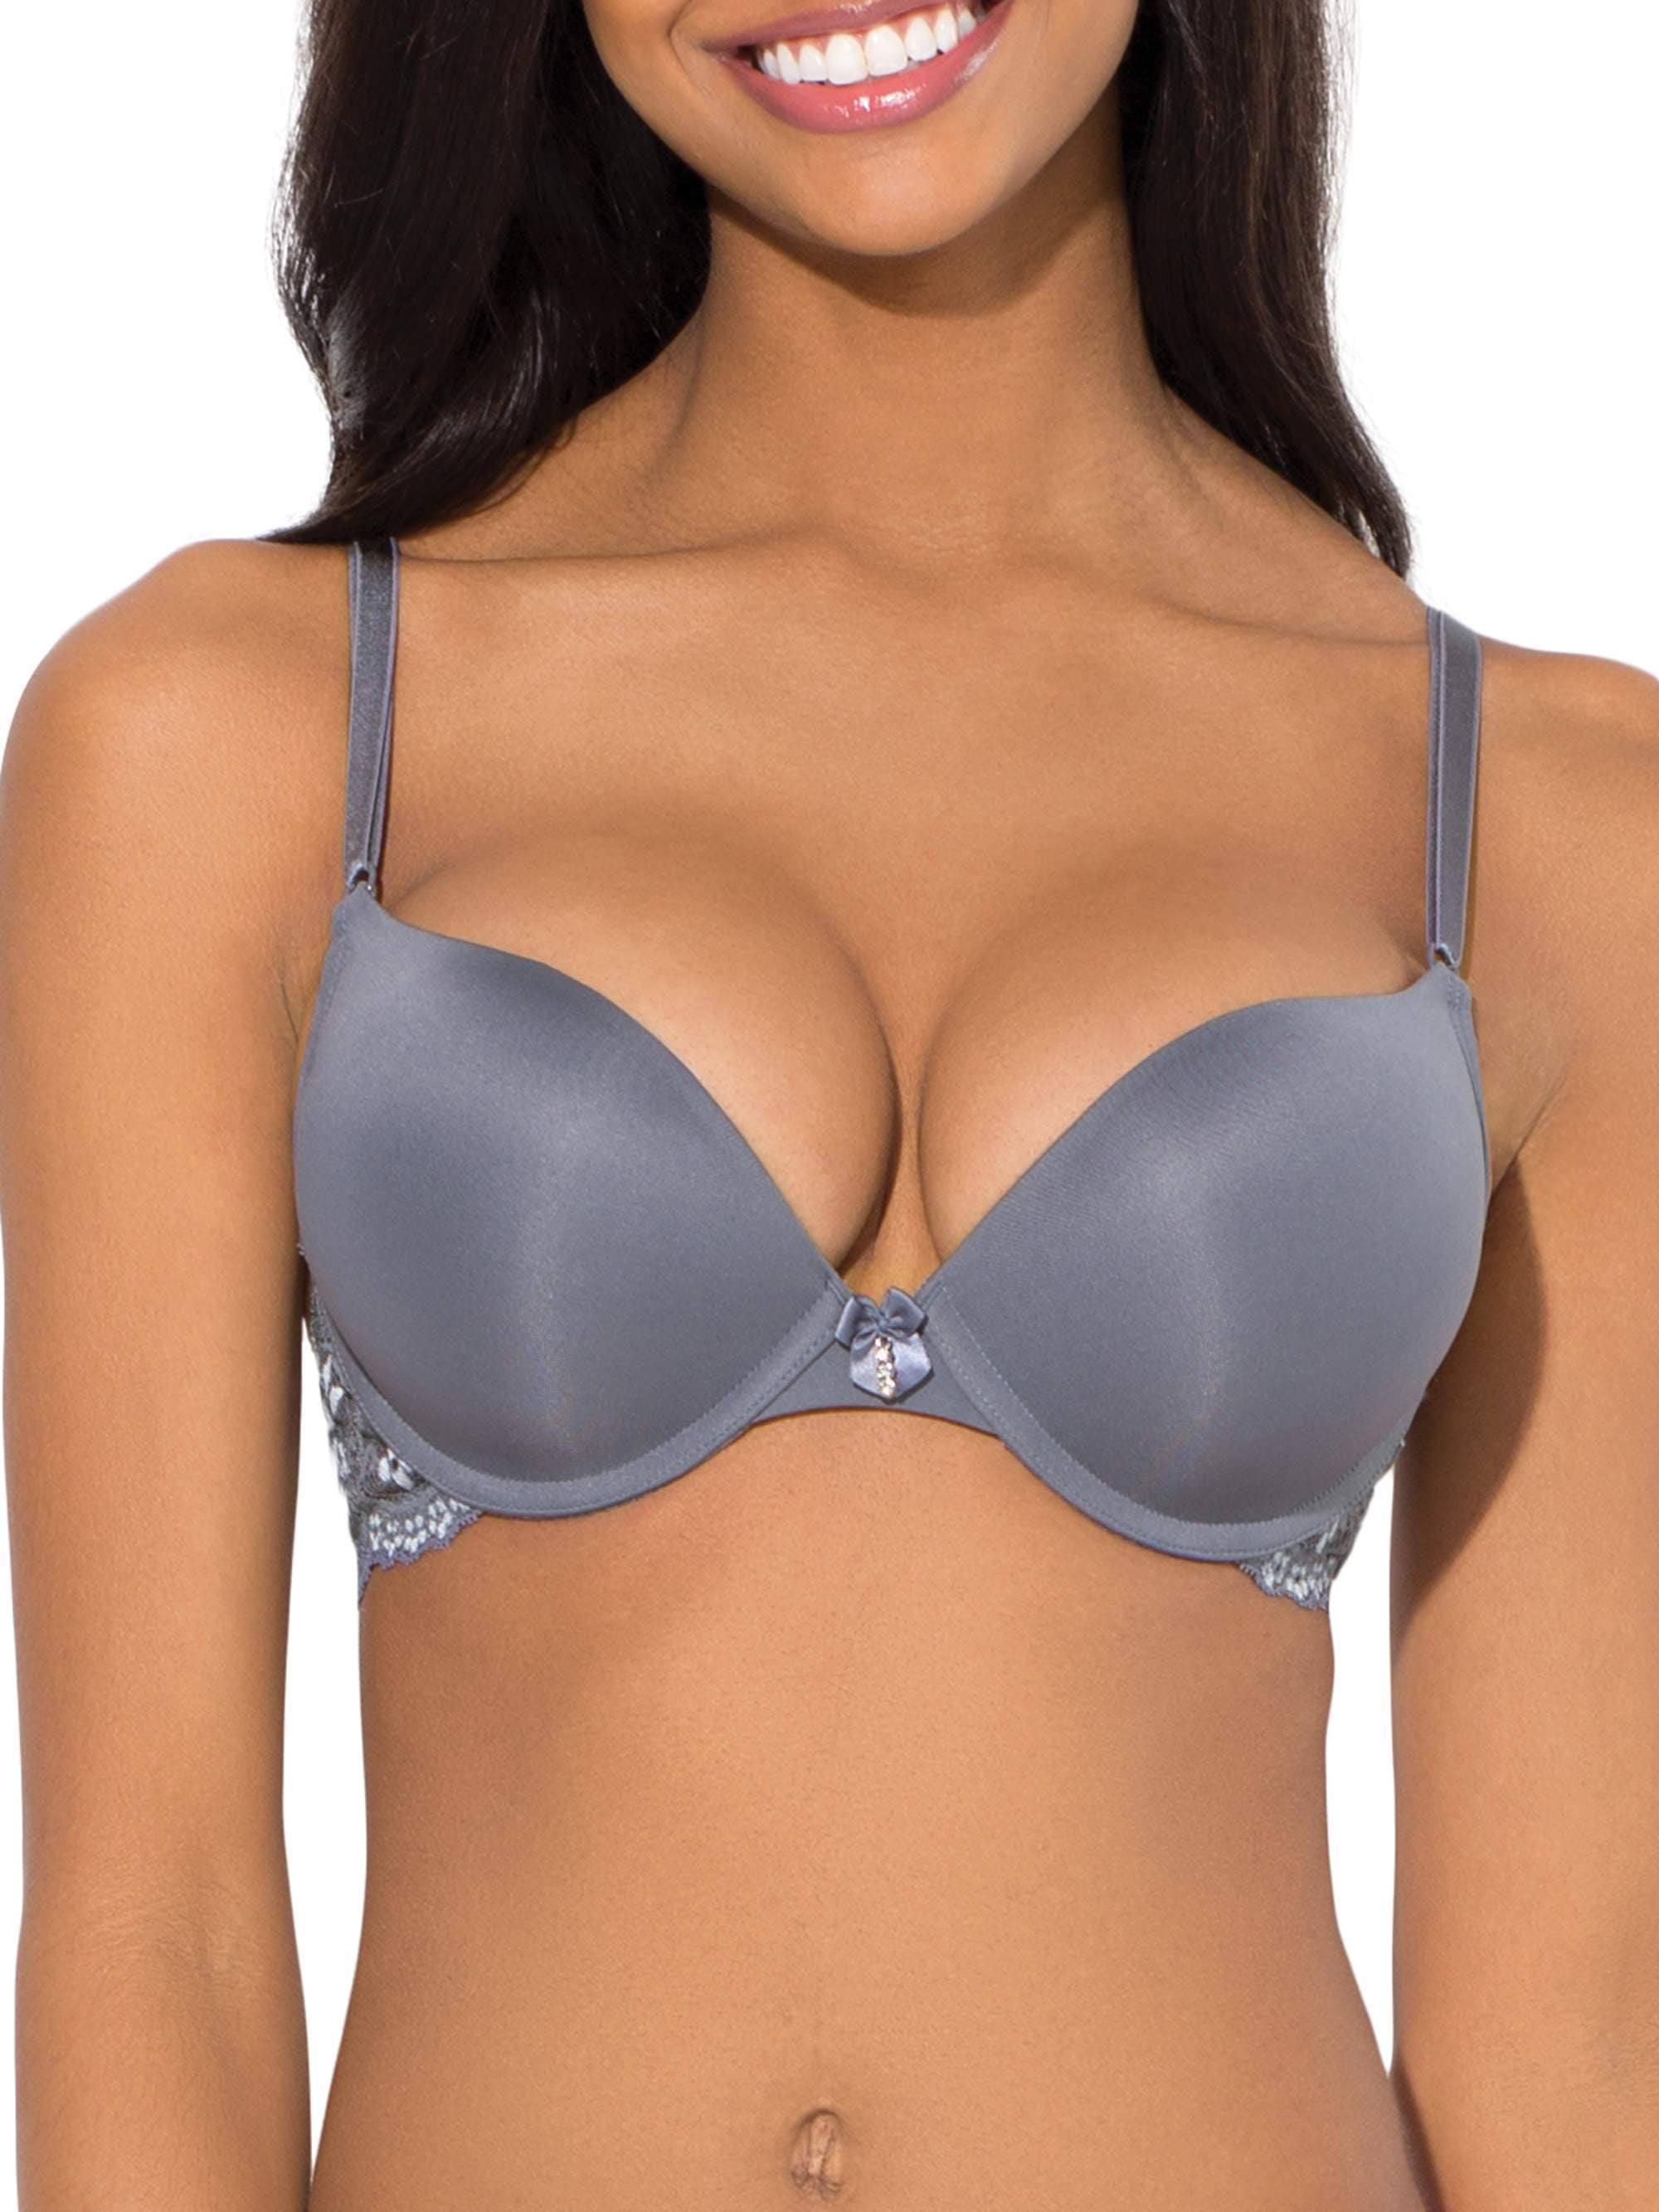 Buy Smart & Sexy Women's Maximum Cleavage Underwire Push up Bra, in the  Buff with Lace Wings, 36B at